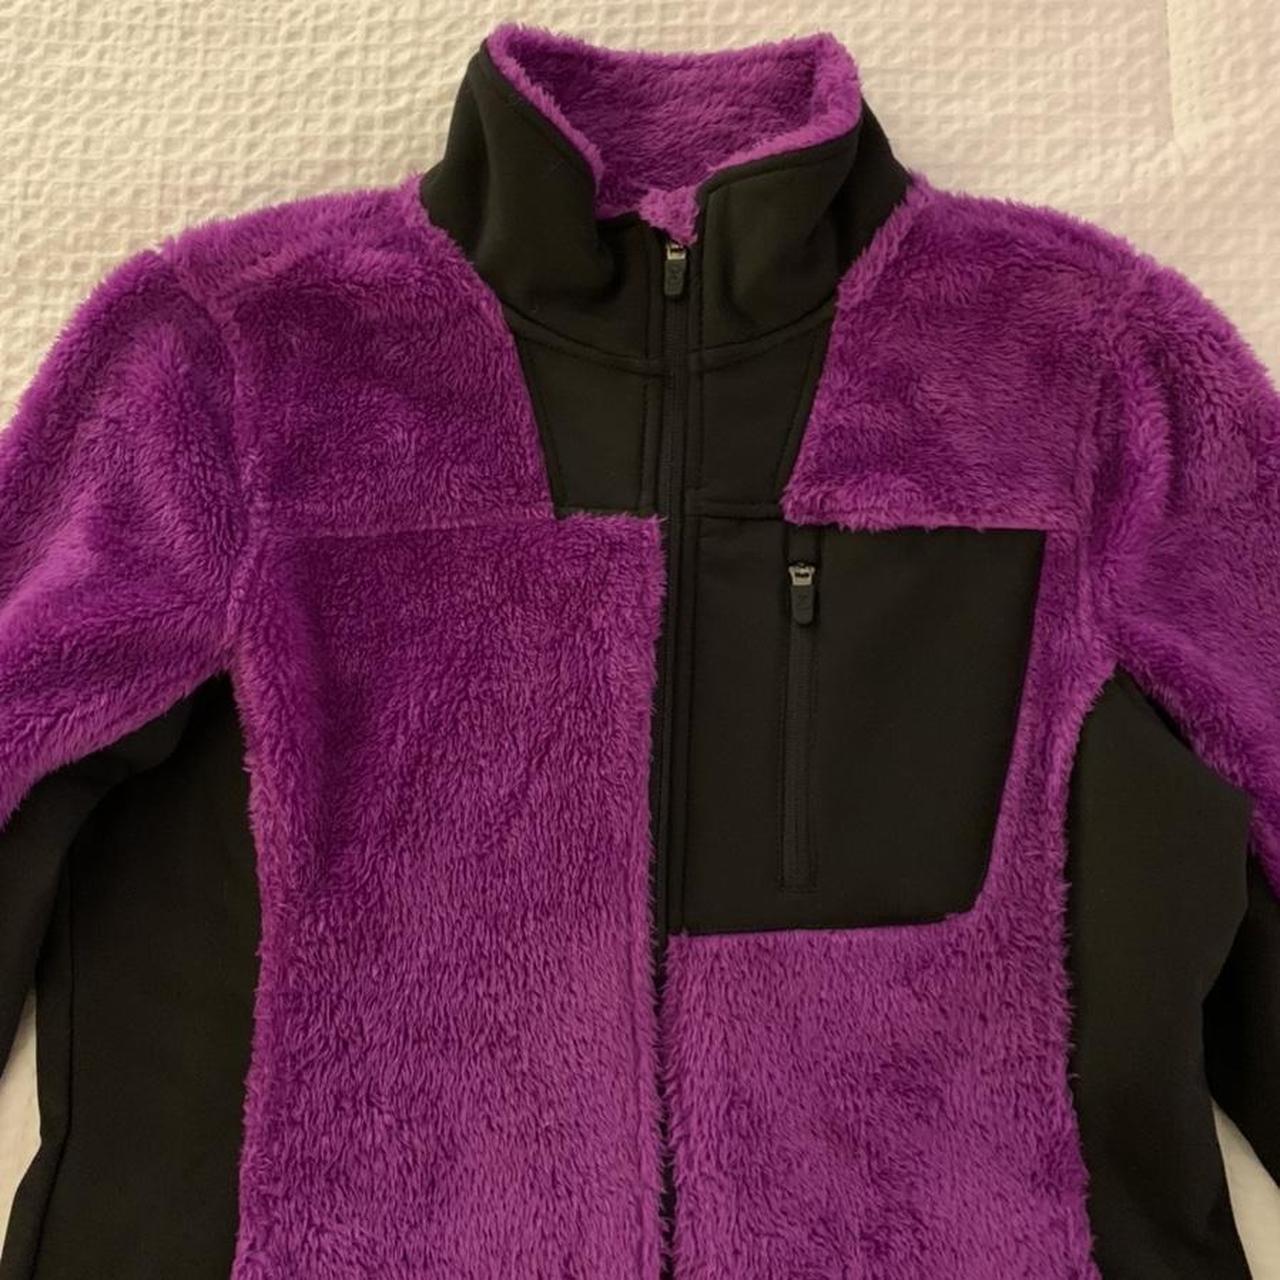 fluffy jacket for the winter time💜 - Depop